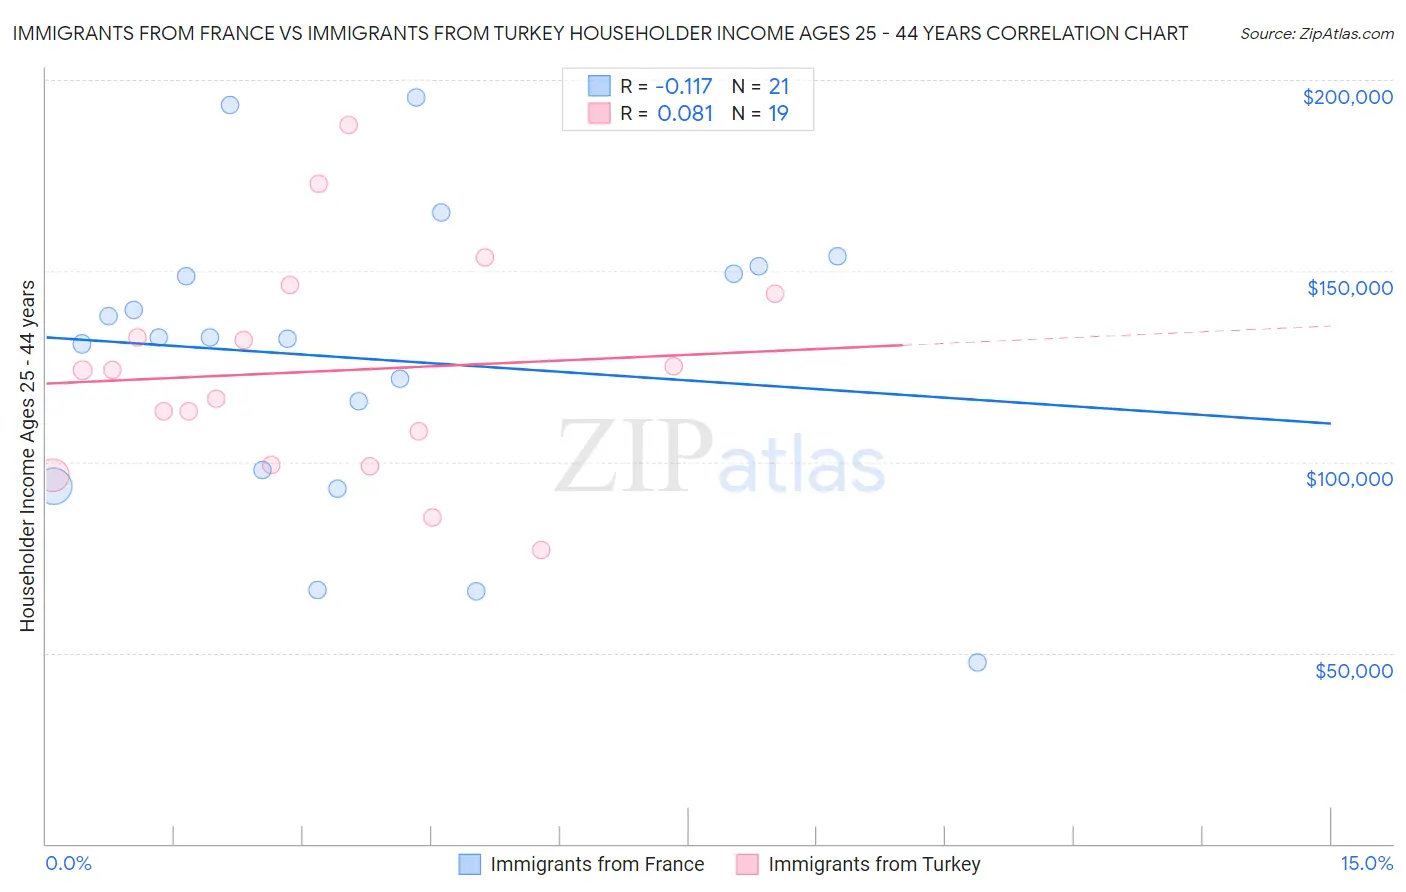 Immigrants from France vs Immigrants from Turkey Householder Income Ages 25 - 44 years